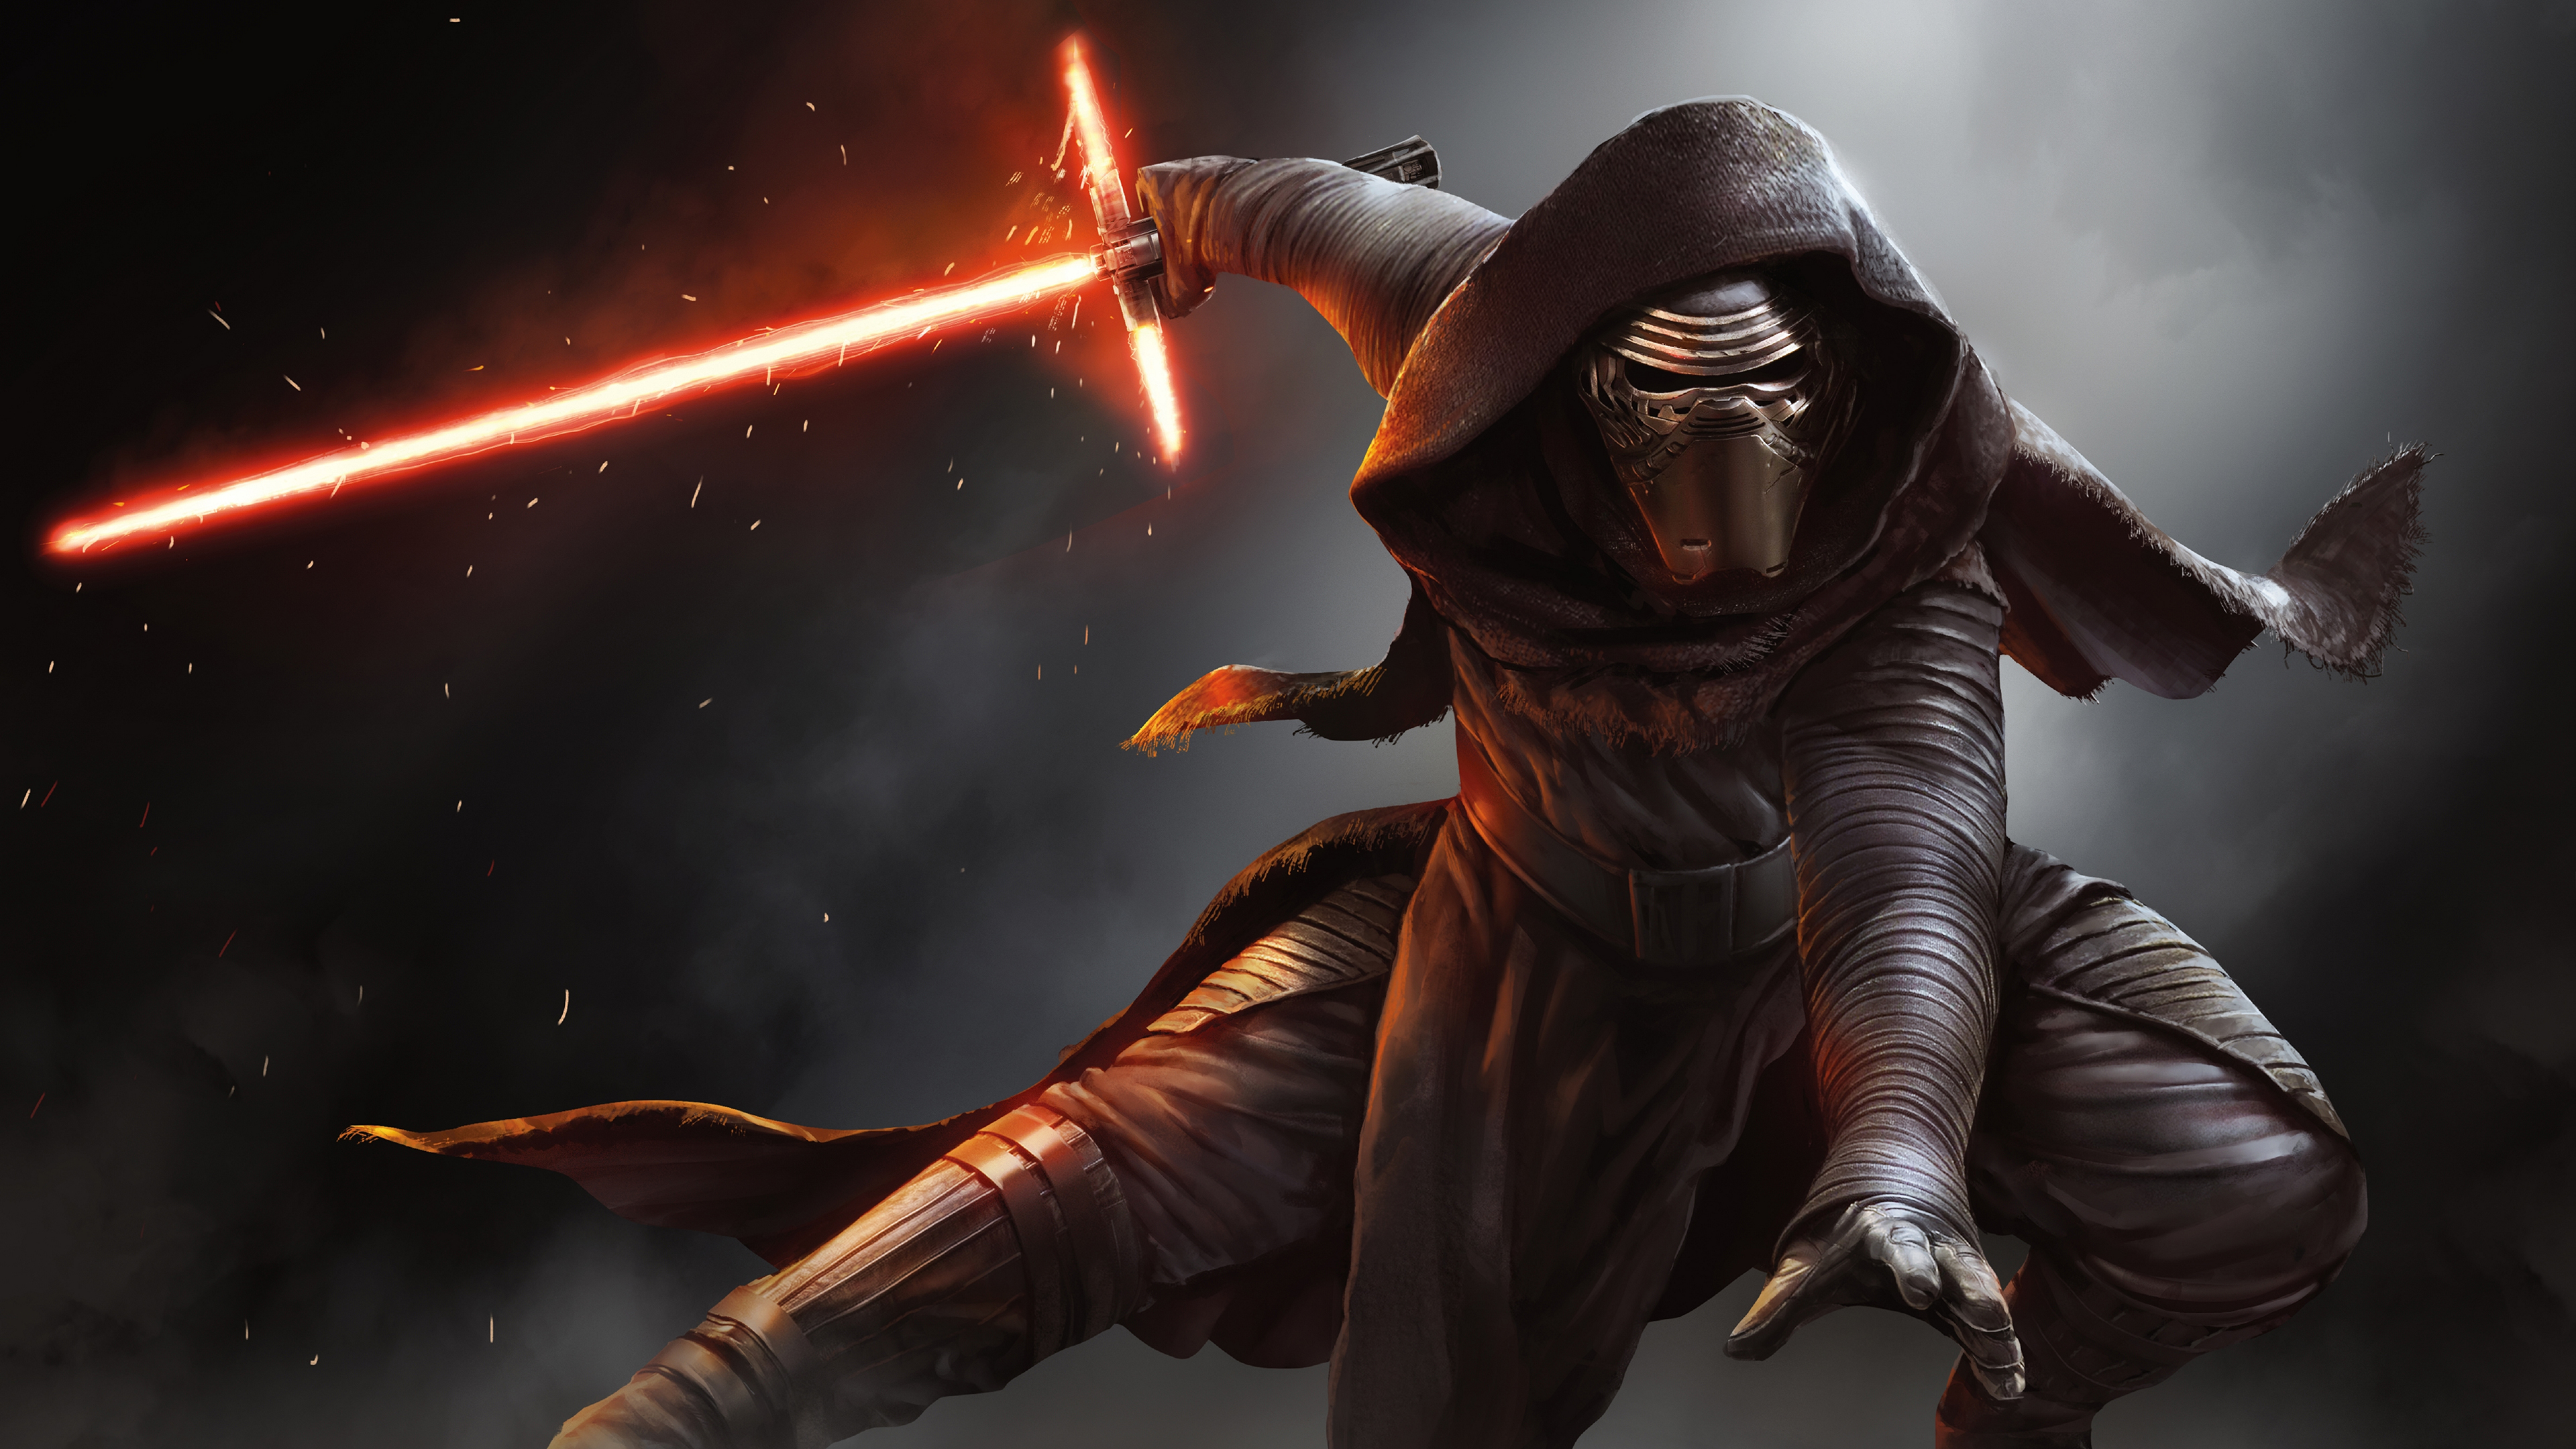 Star Wars The Force Awakens Wallpapers Awesome Wallpapers